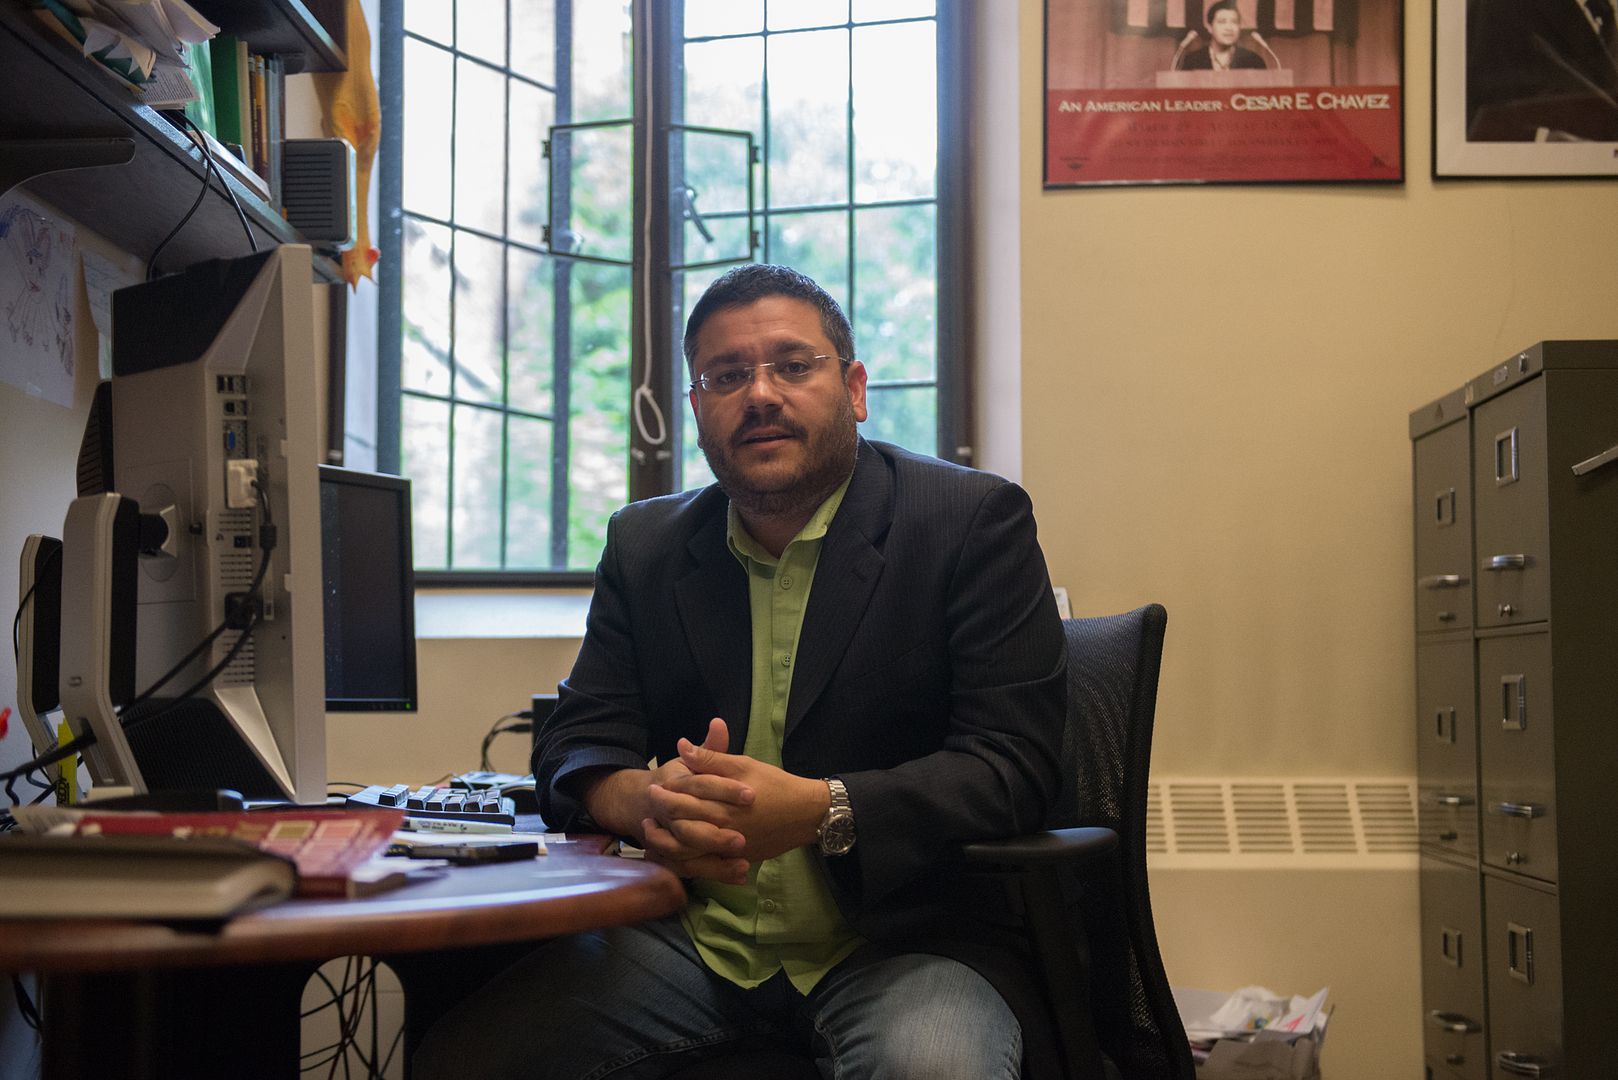 Matt Barreto’s research has been instrumental in the national fight over voter ID laws.